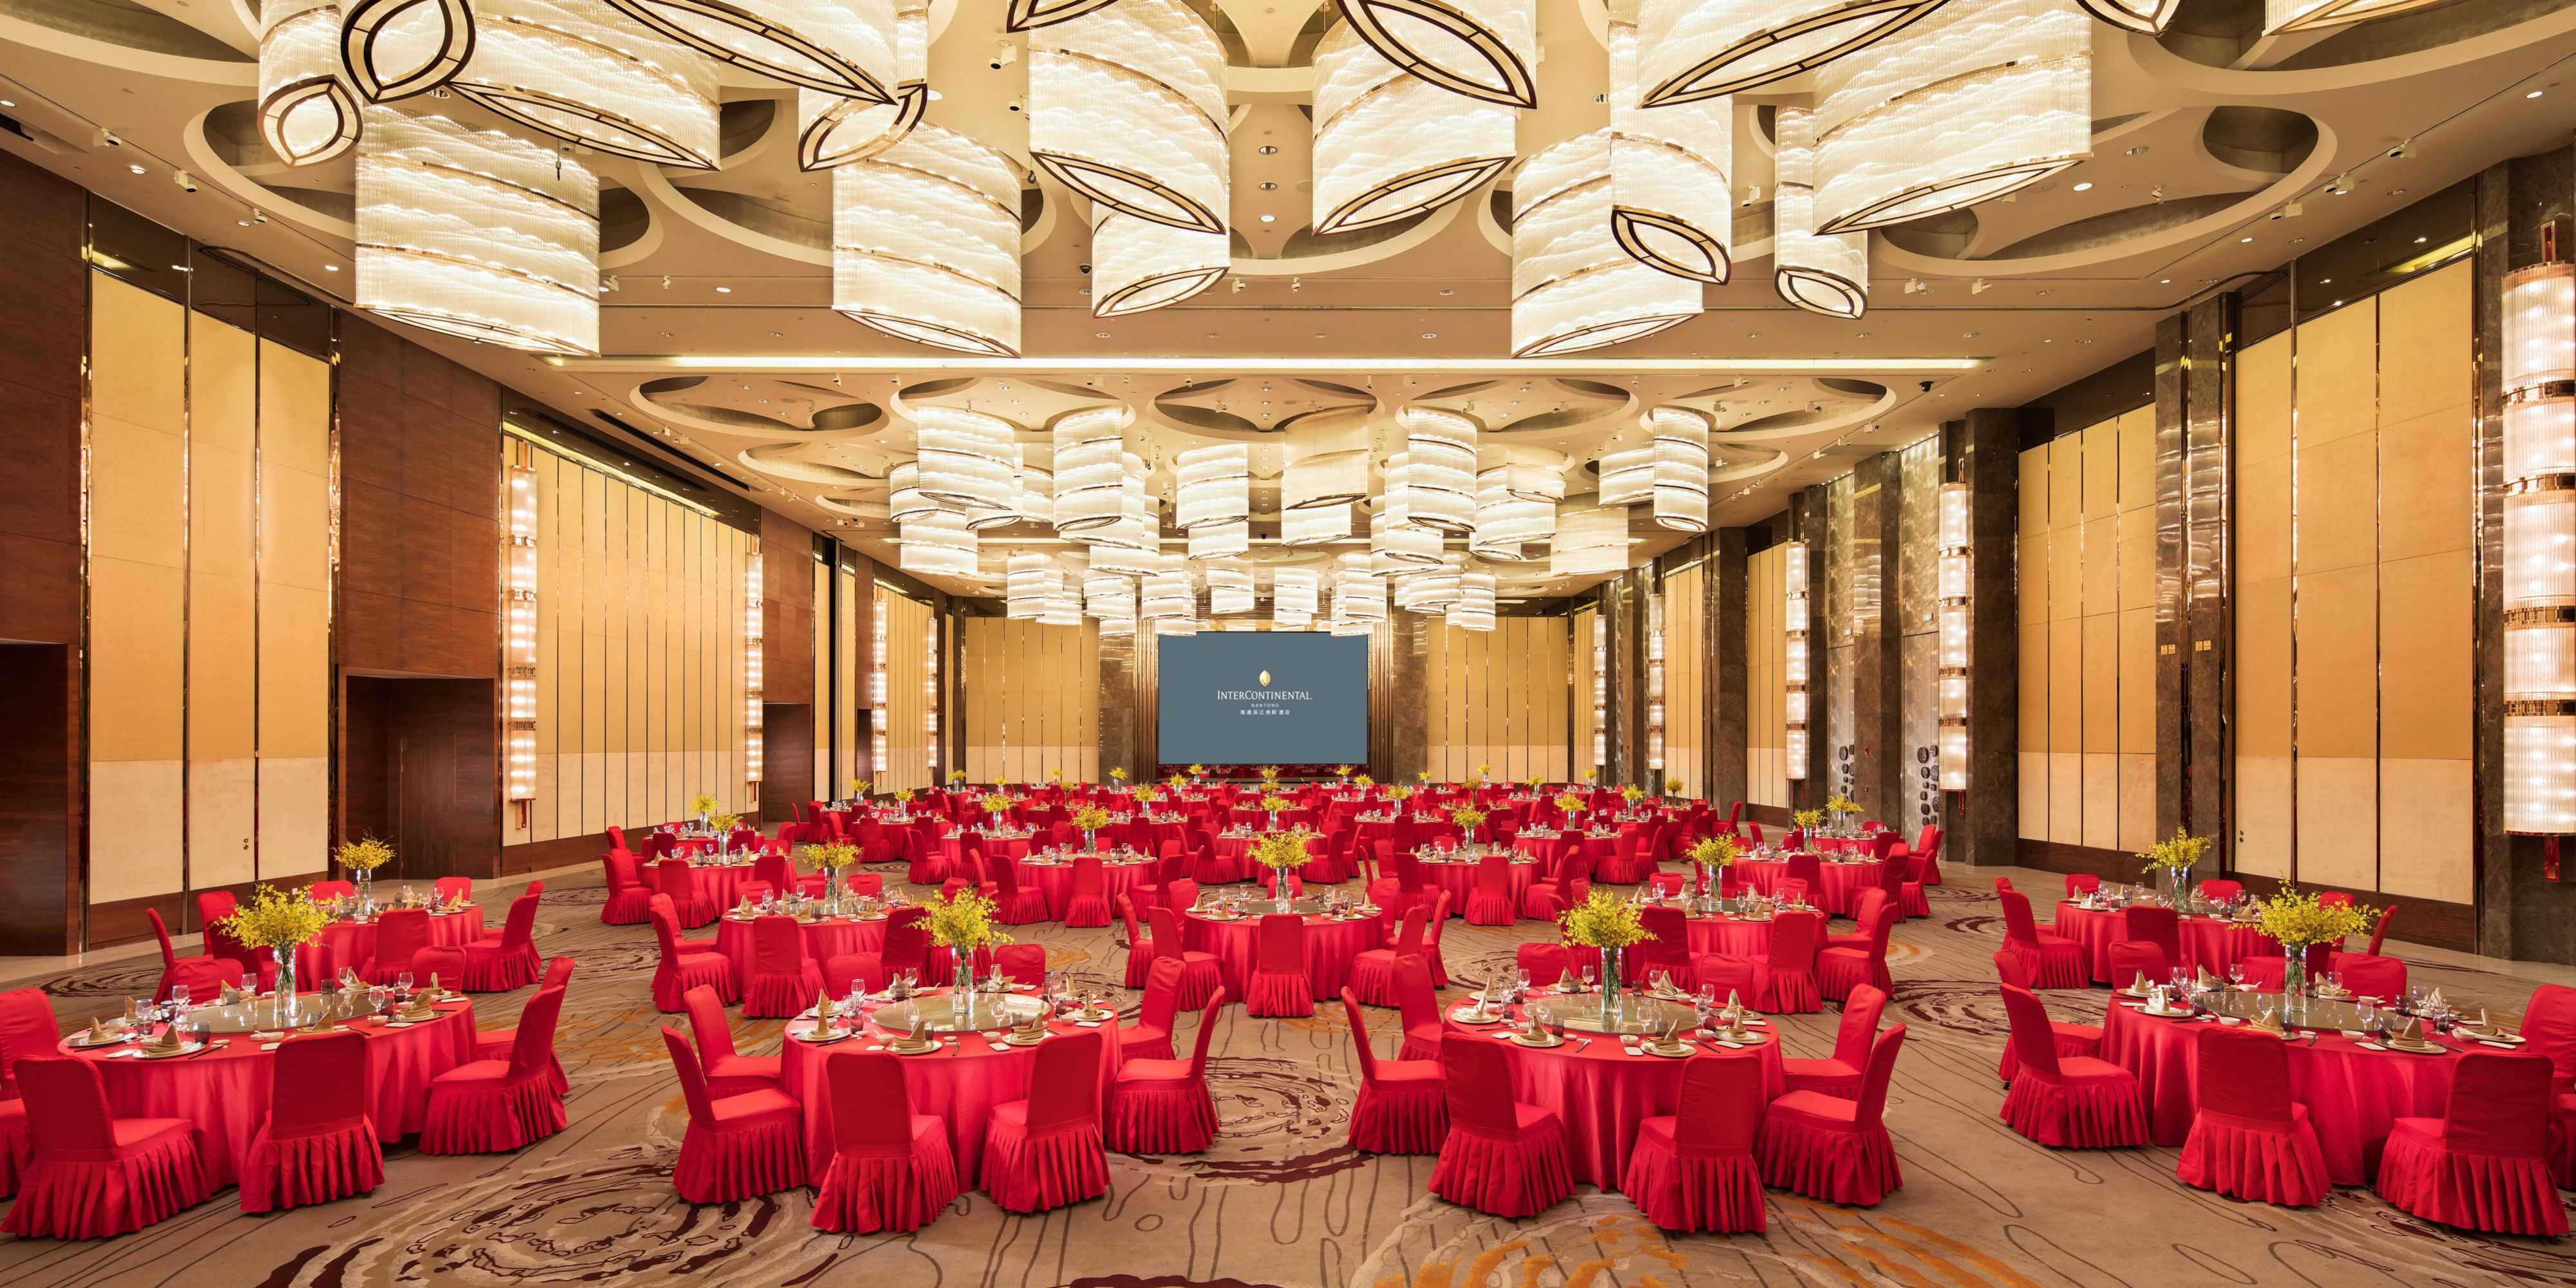 The hotel offers more than 4,800 m² of event and conference space. Including two pillar-free ballrooms (Yuan Fu, occupying 1,600 m² with 9 meters ceiling, Yuan Xi, occupying 900 m² with 8 meters ceiling) and Yuan Hui, an outdoor ballroom occupying 1,500 m² can host up to 1,000 people for events including fashion shows, gala dinners and conferences.